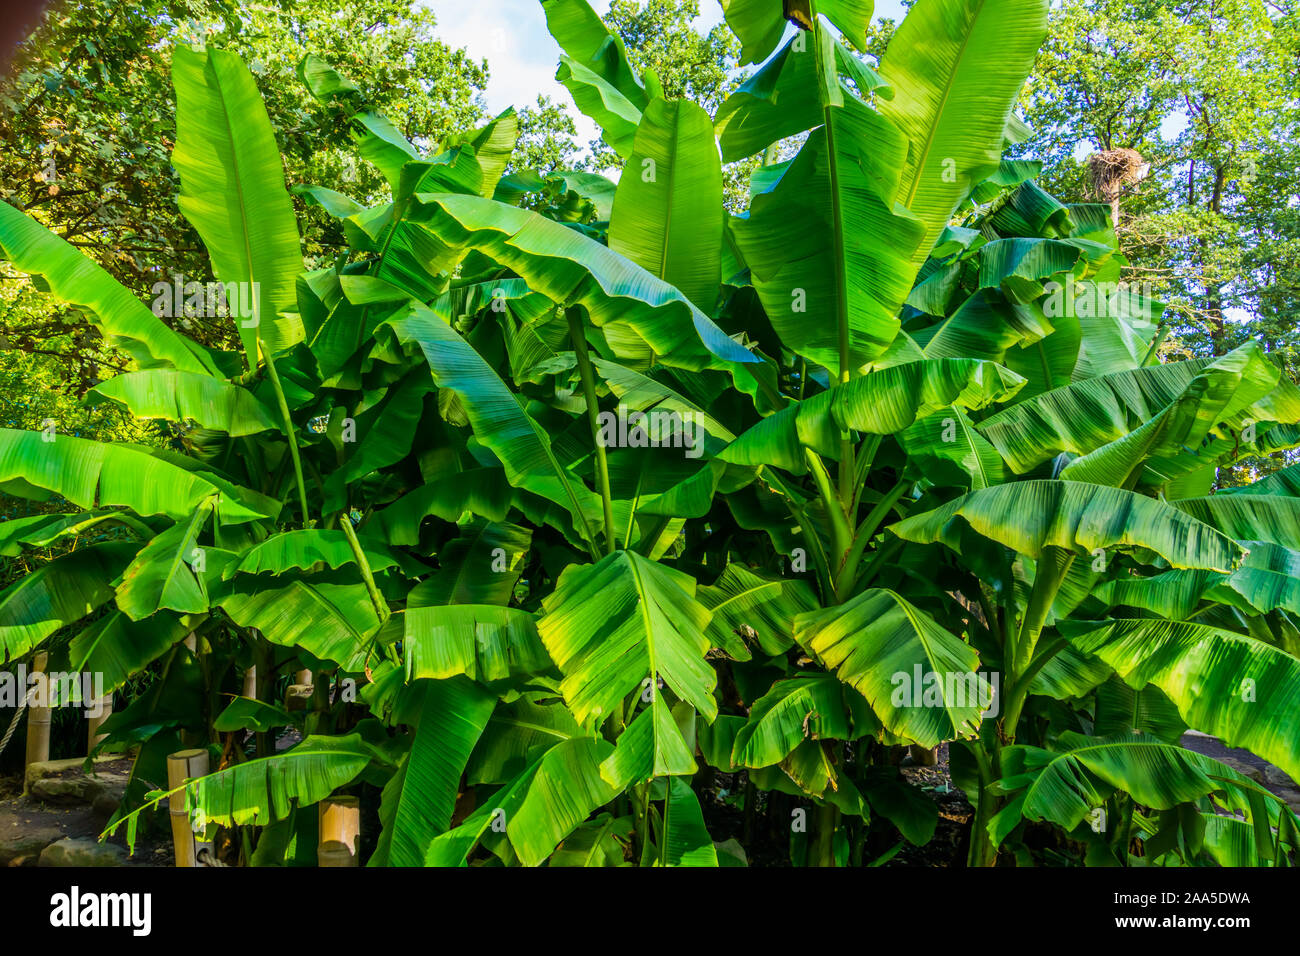 closeup of banana plants in a tropical garden, nature and horticulture background Stock Photo